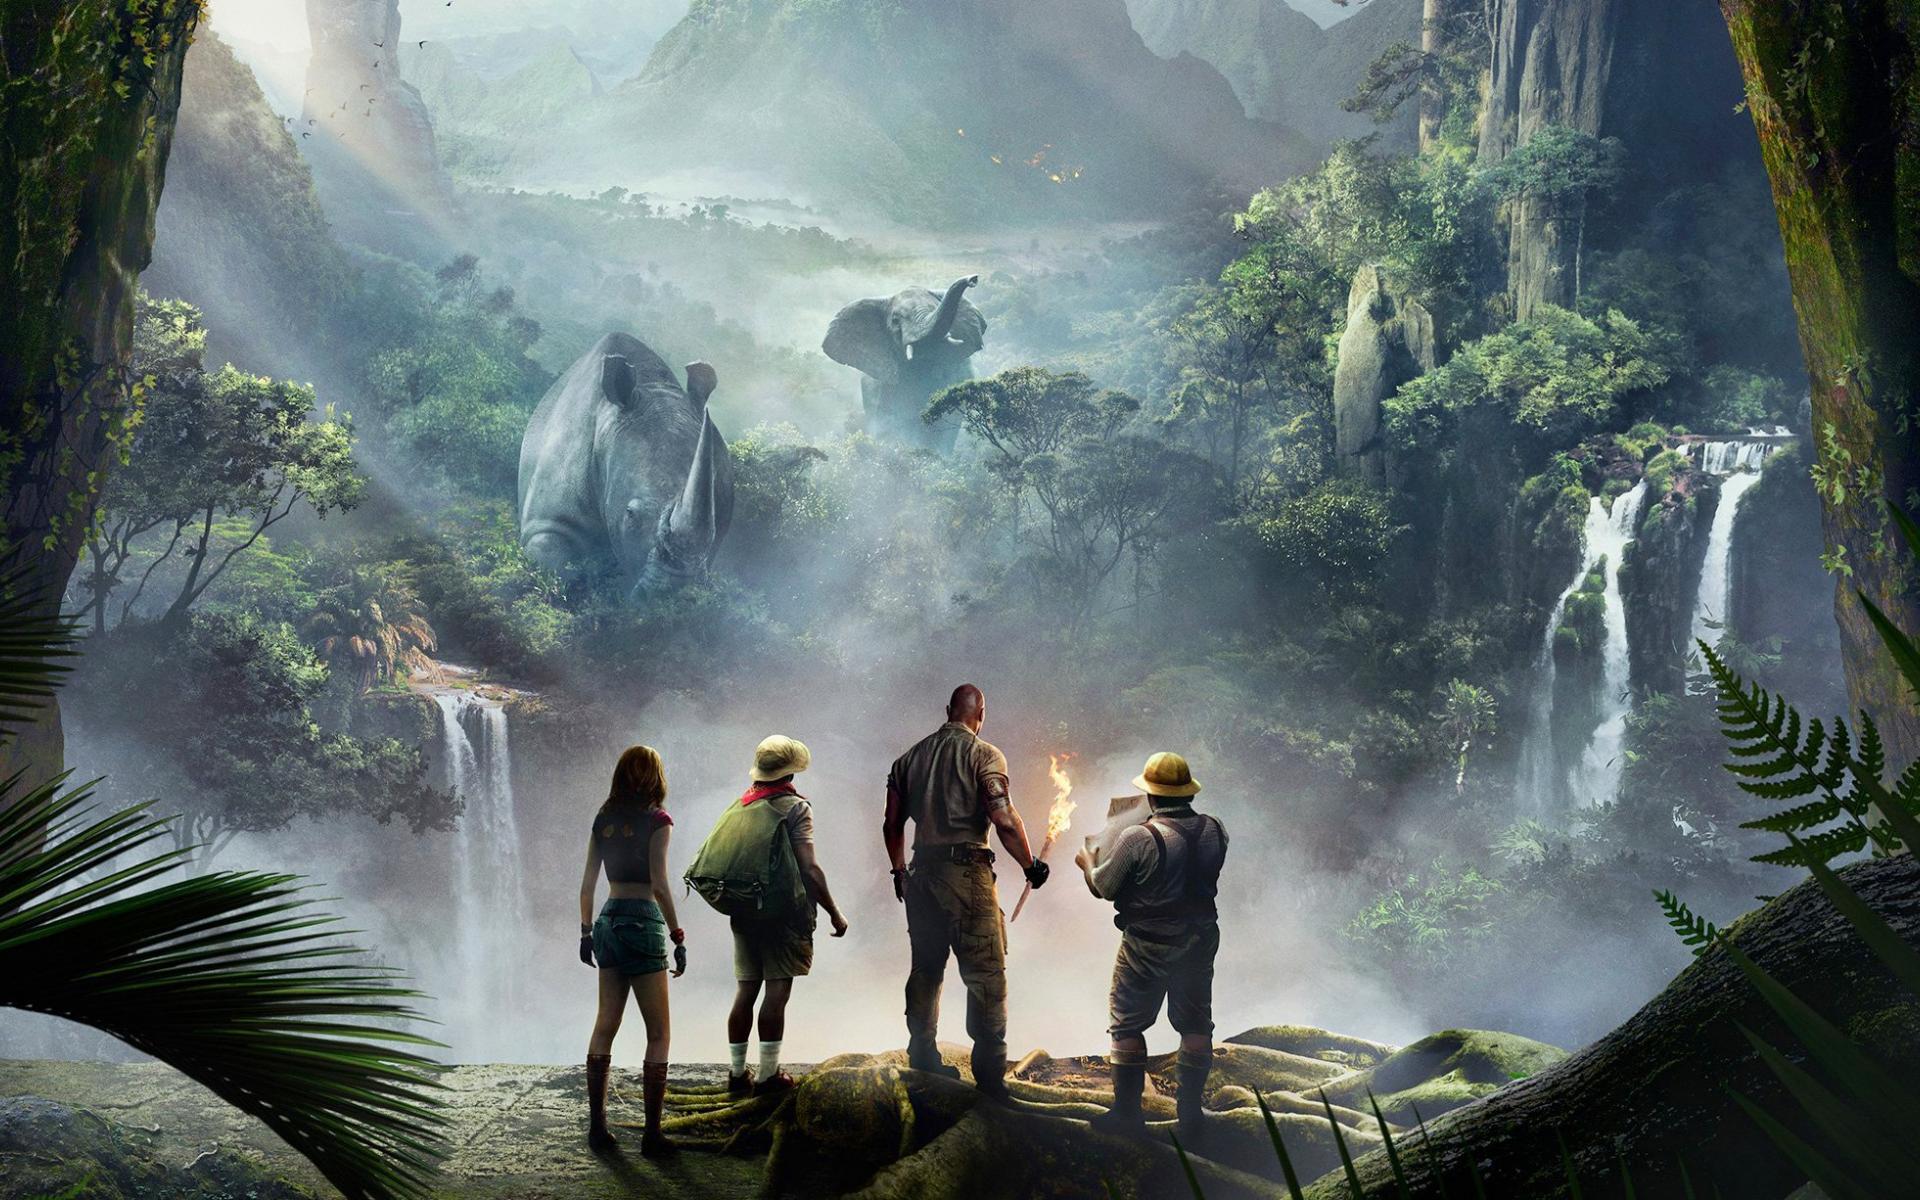 Free download Jumanji Welcome to the Jungle Wallpaper 3 2025 X 1226 stmednet [1920x1200] for your Desktop, Mobile & Tablet. Explore Jumanji: Welcome To The Jungle Wallpaper. Jumanji: Welcome